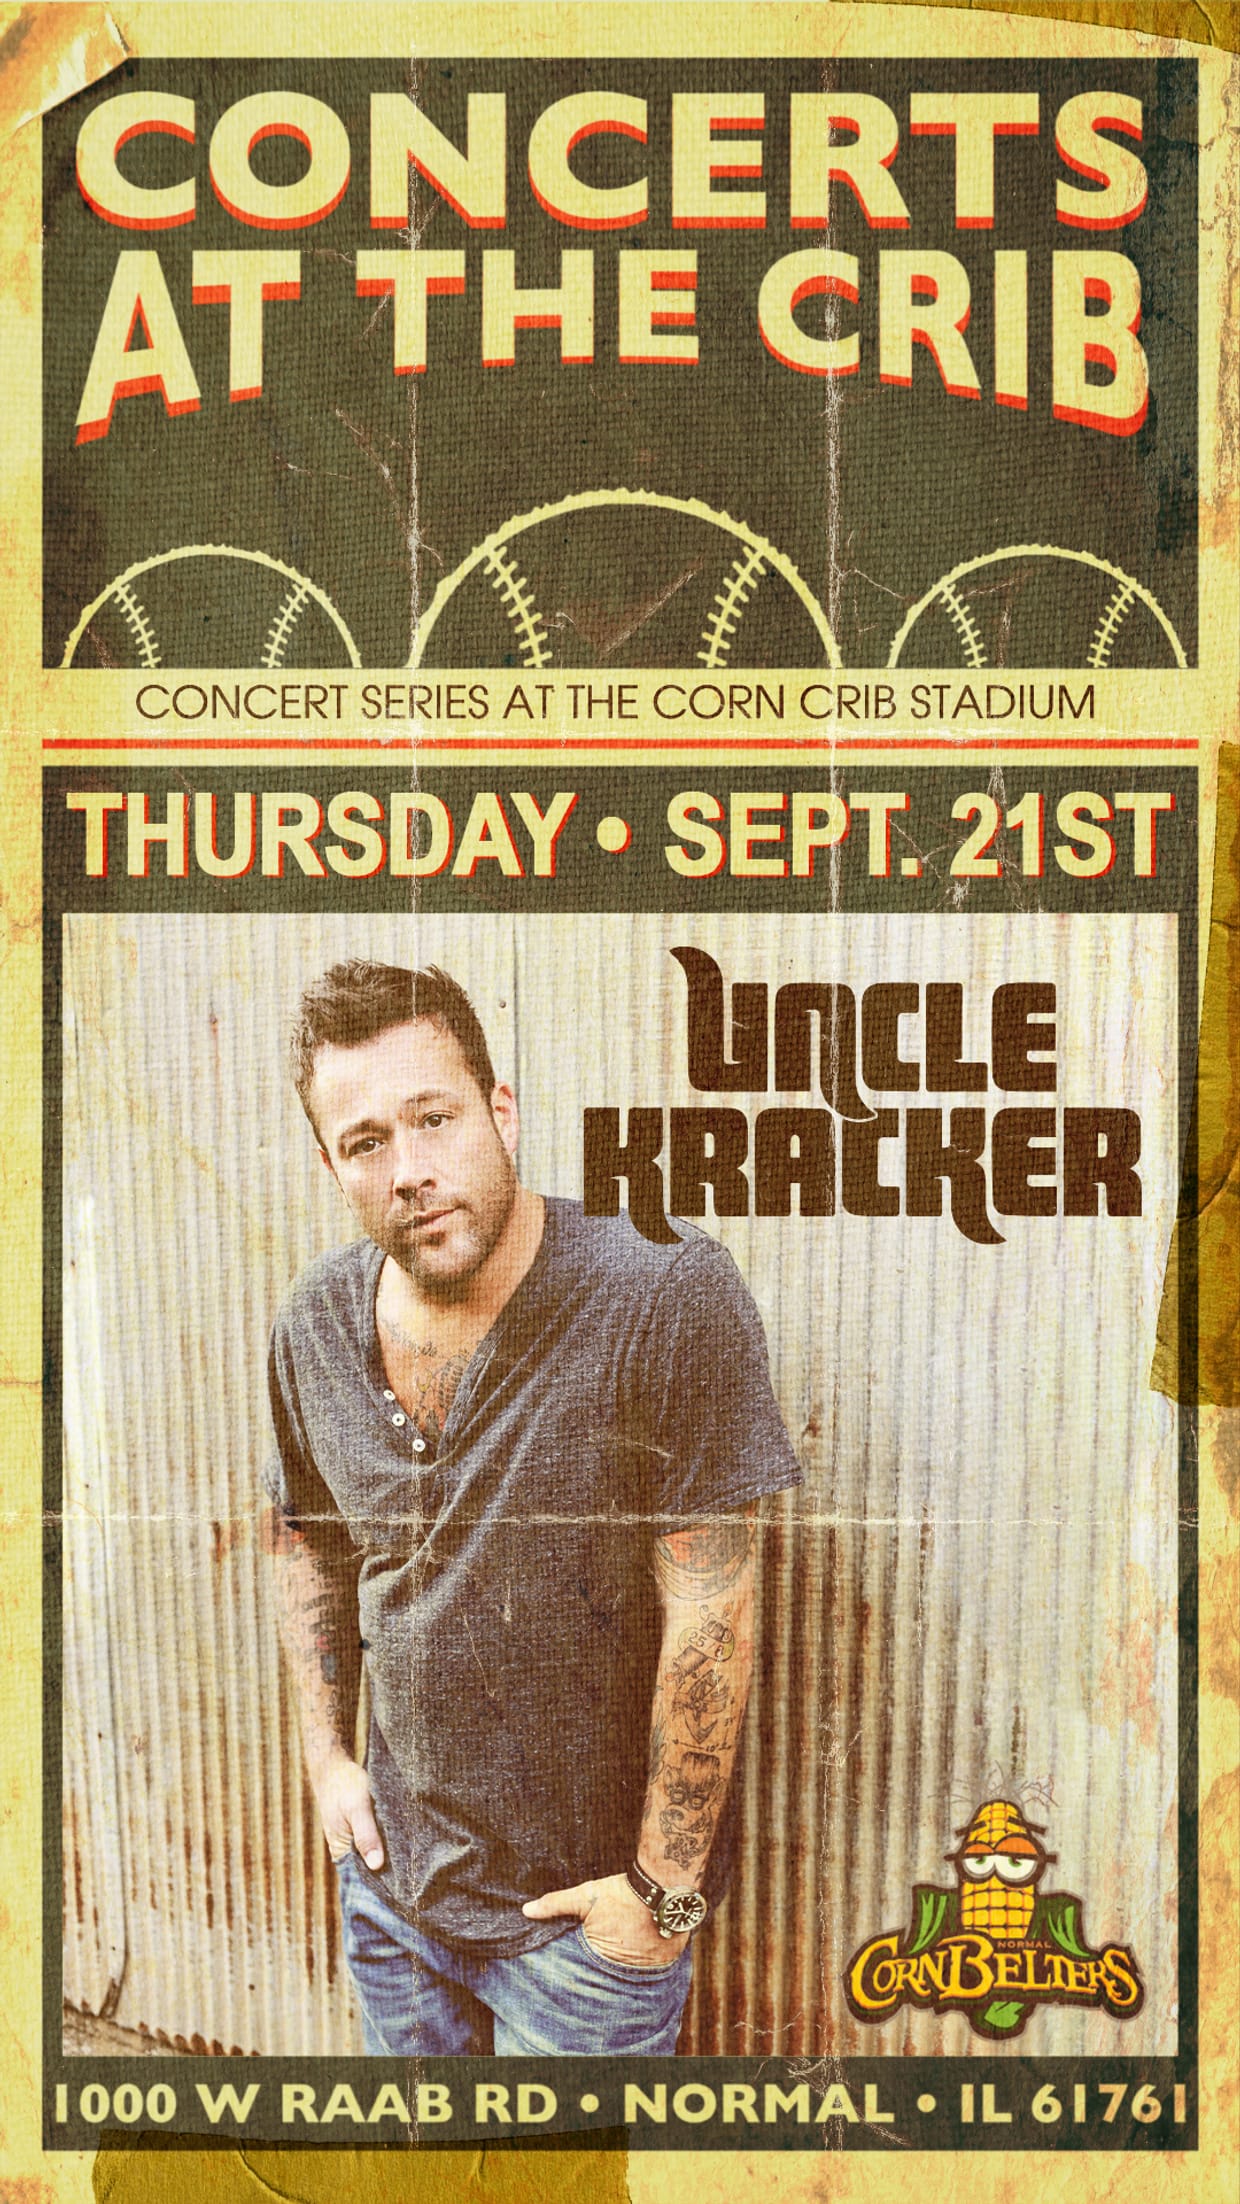 Concerts at the Crib: Uncle Kracker